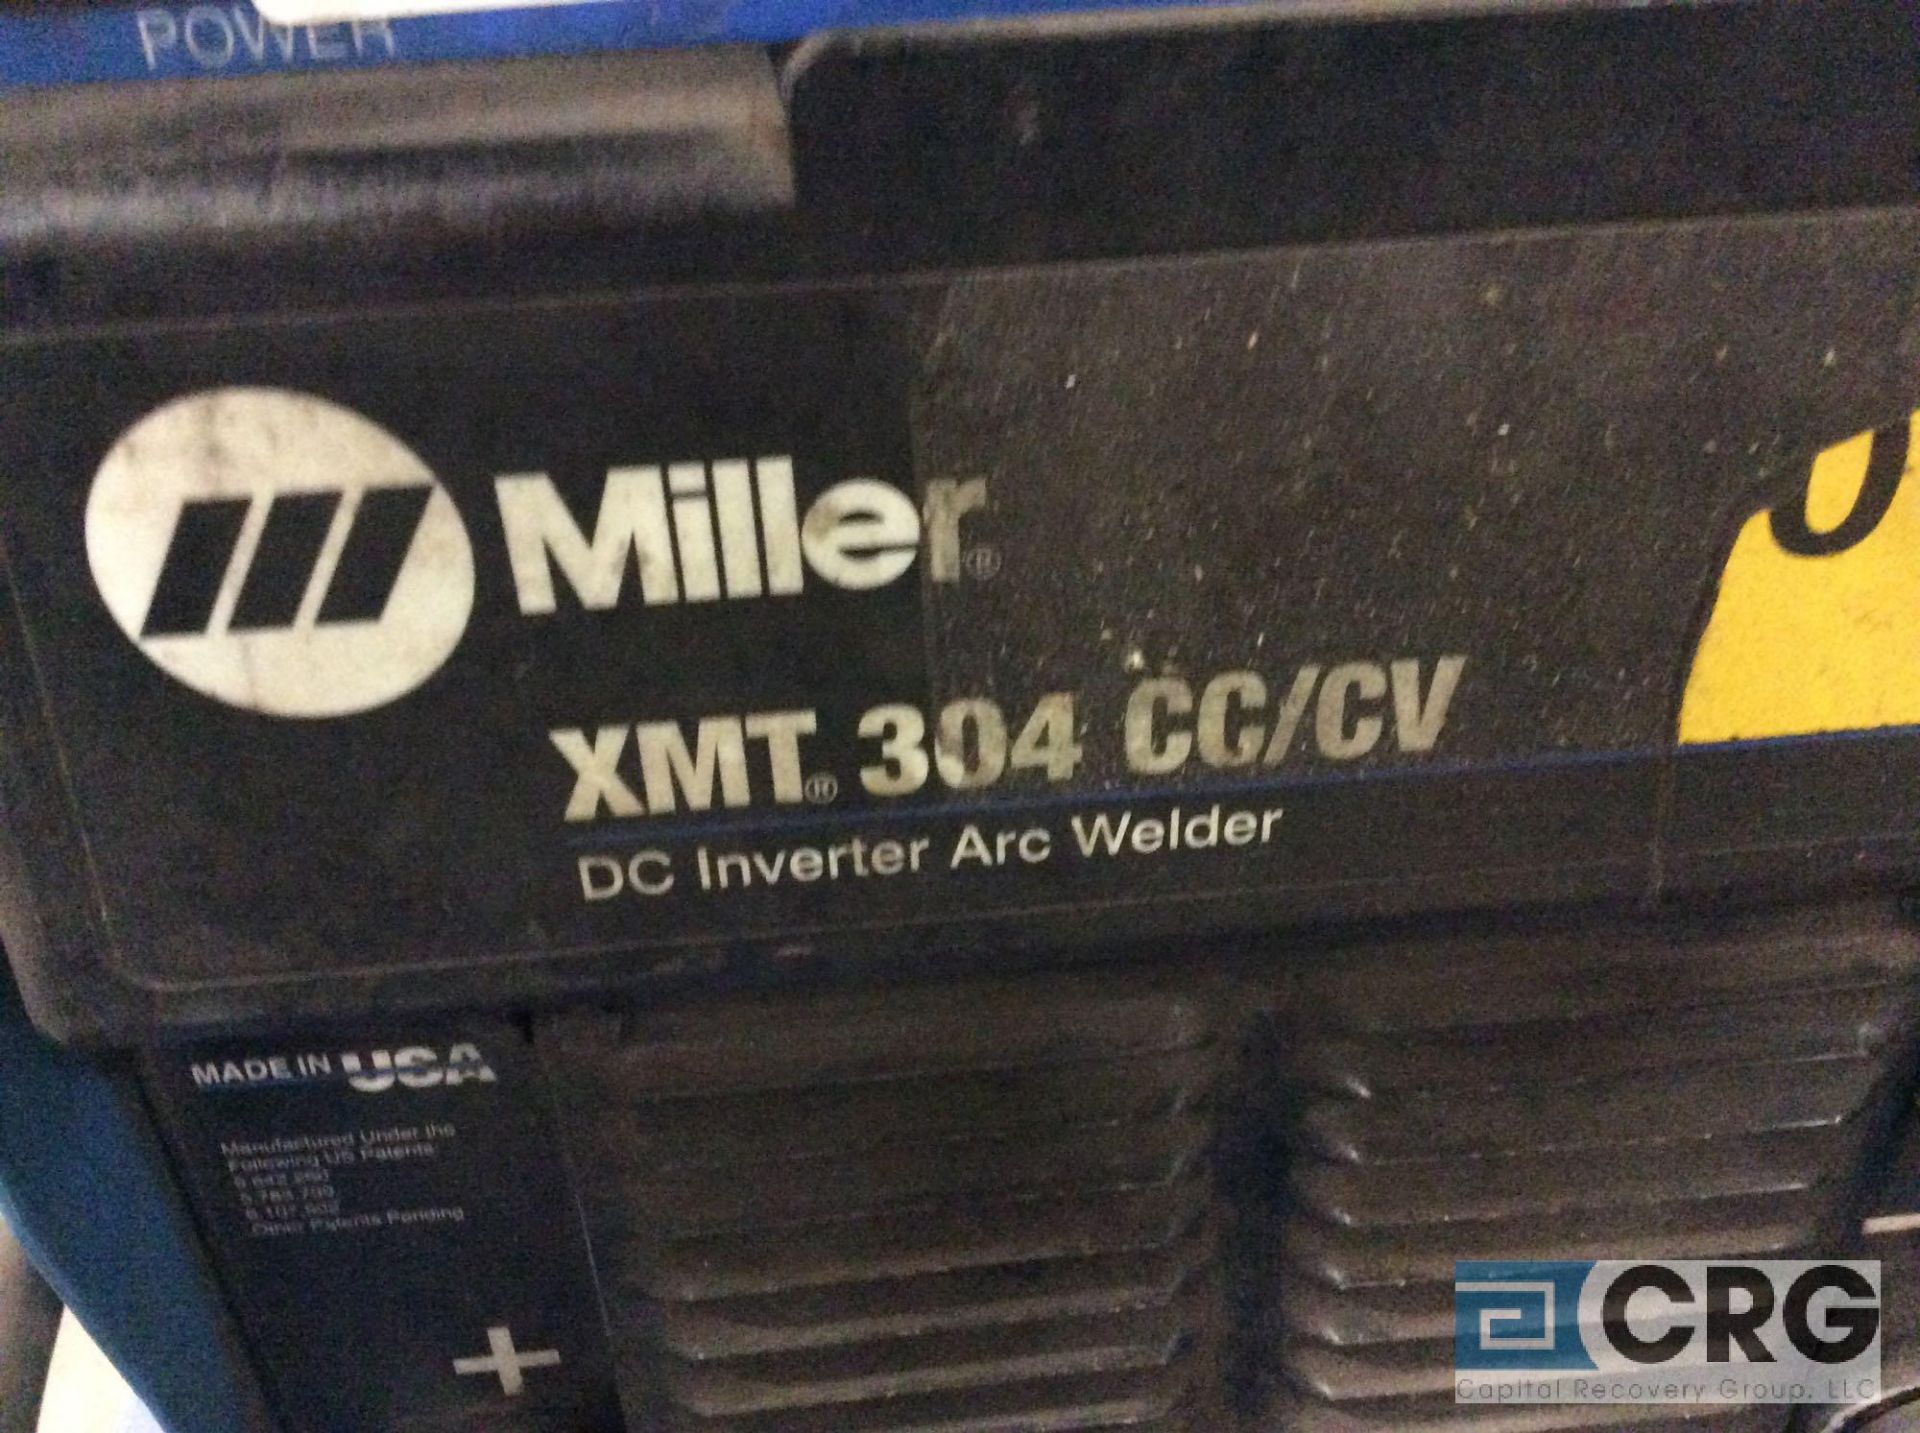 Miller XMT 304 CC/CV DC inverter arc welder, 96 max OCV, 3 phase, With 24V wire feed - Image 2 of 3